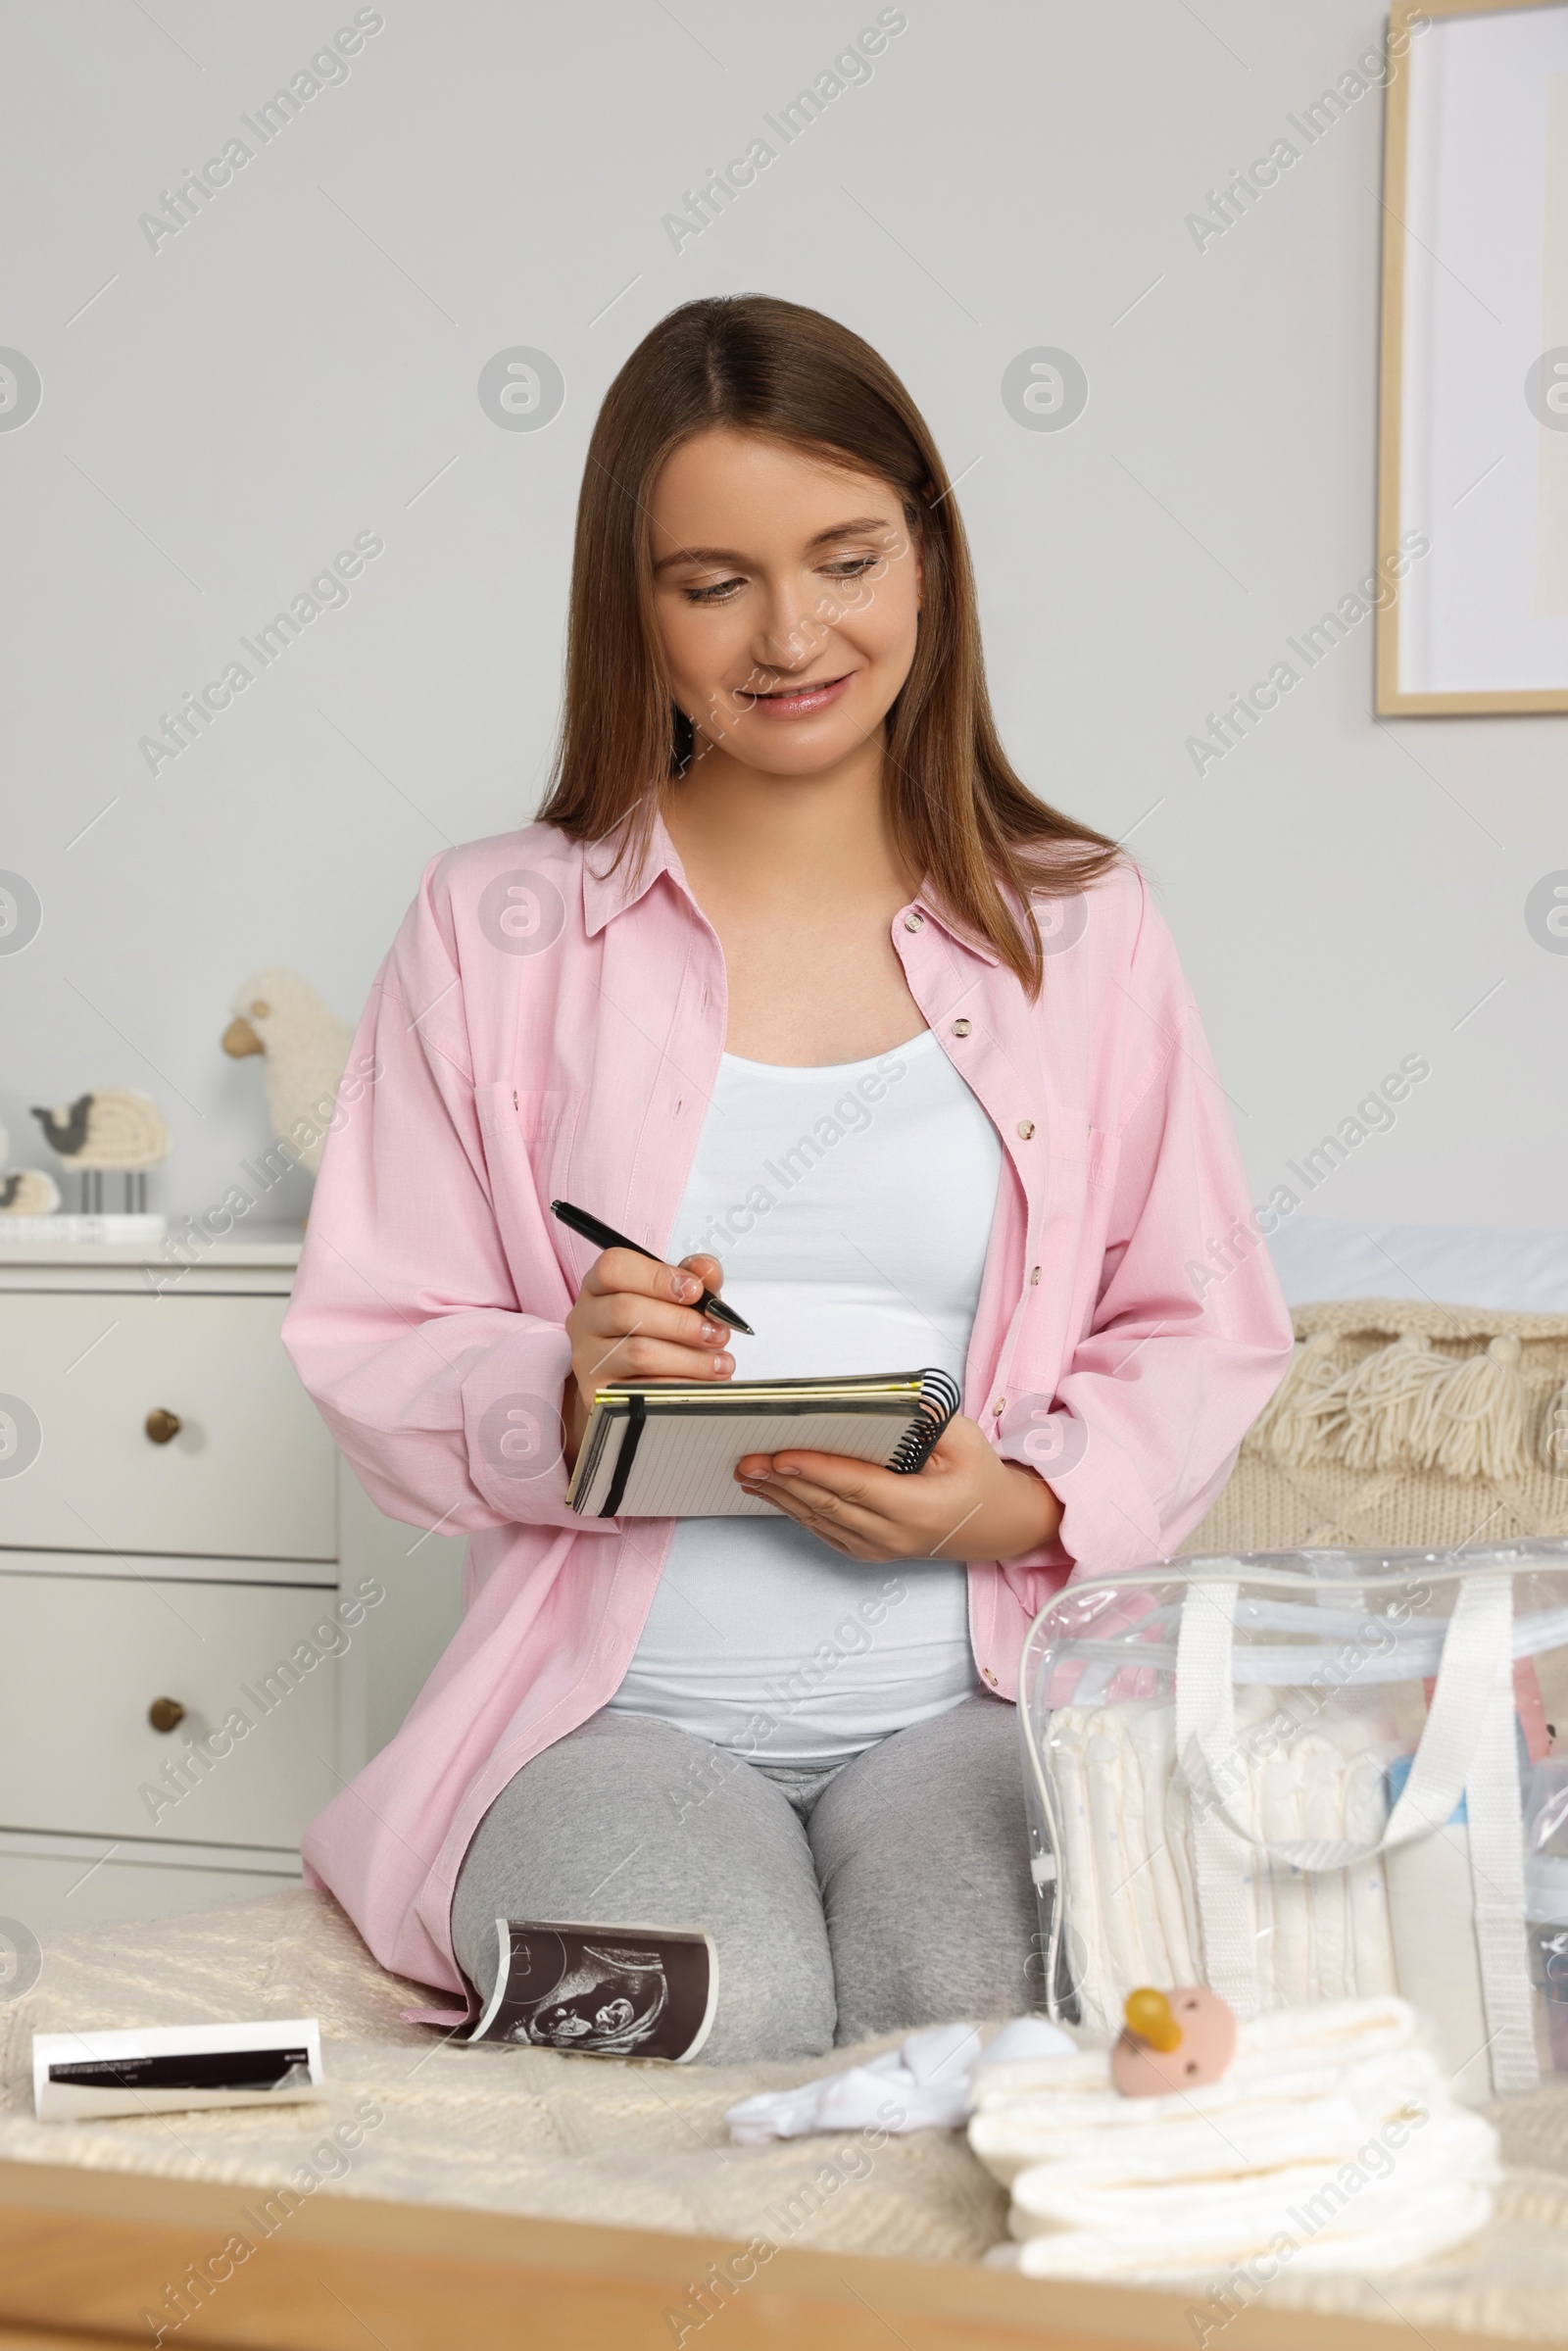 Photo of Pregnant woman preparing list of necessary items to bring into maternity hospital in bedroom